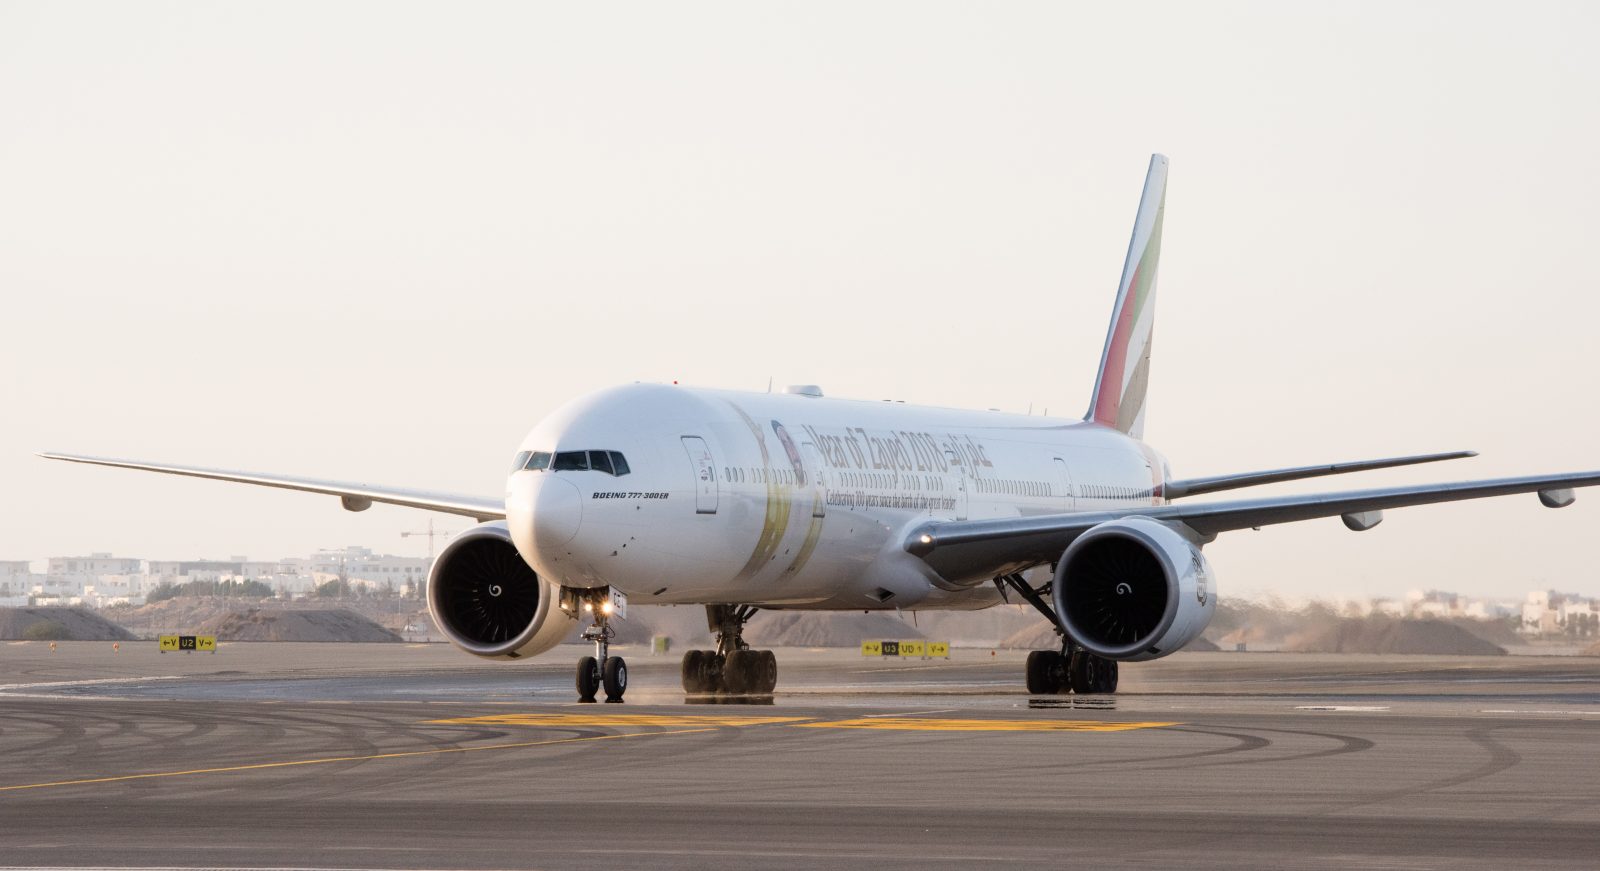 Emirates to Face Crew And Pilot Shortages But Business Looking Good: The Latest Updates From The Airline's President